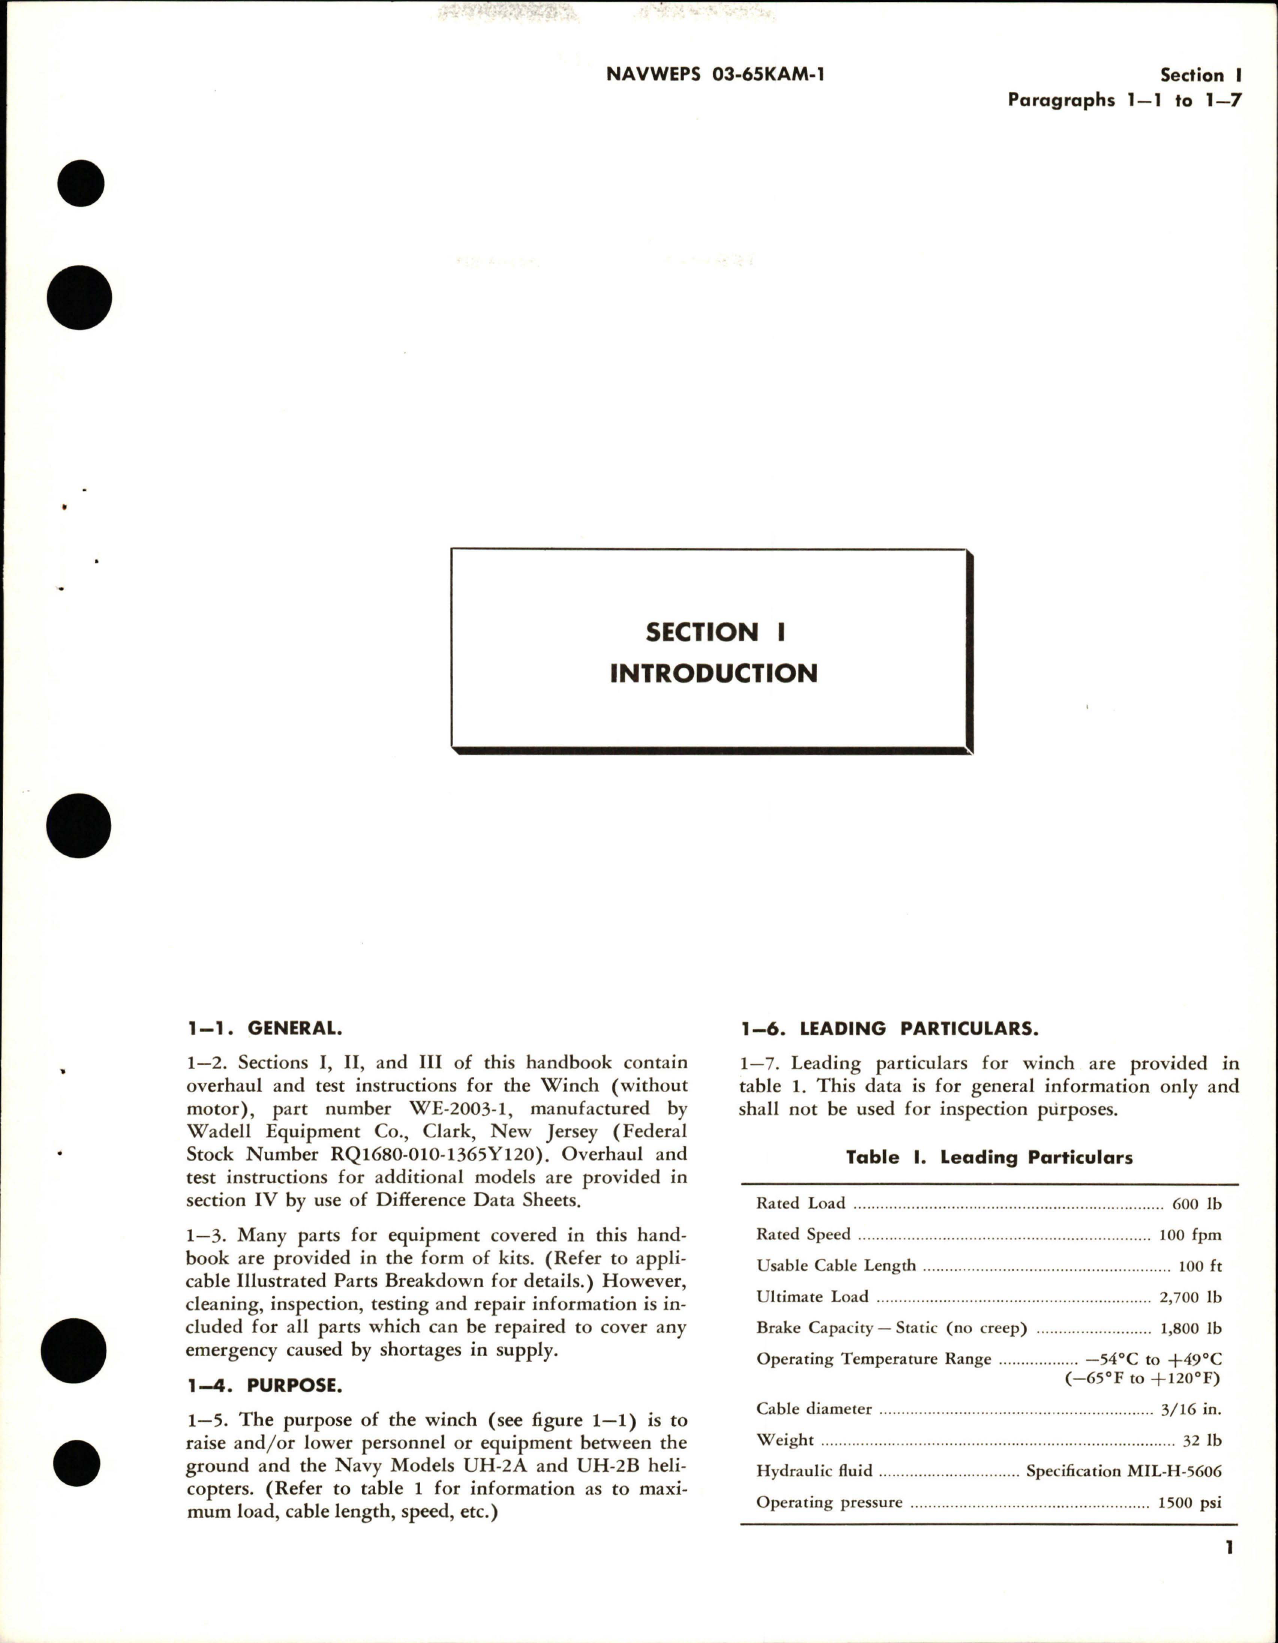 Sample page 5 from AirCorps Library document: Overhaul Instructions for Winch without Motor - Parts WE-2003-1 and K682162-5